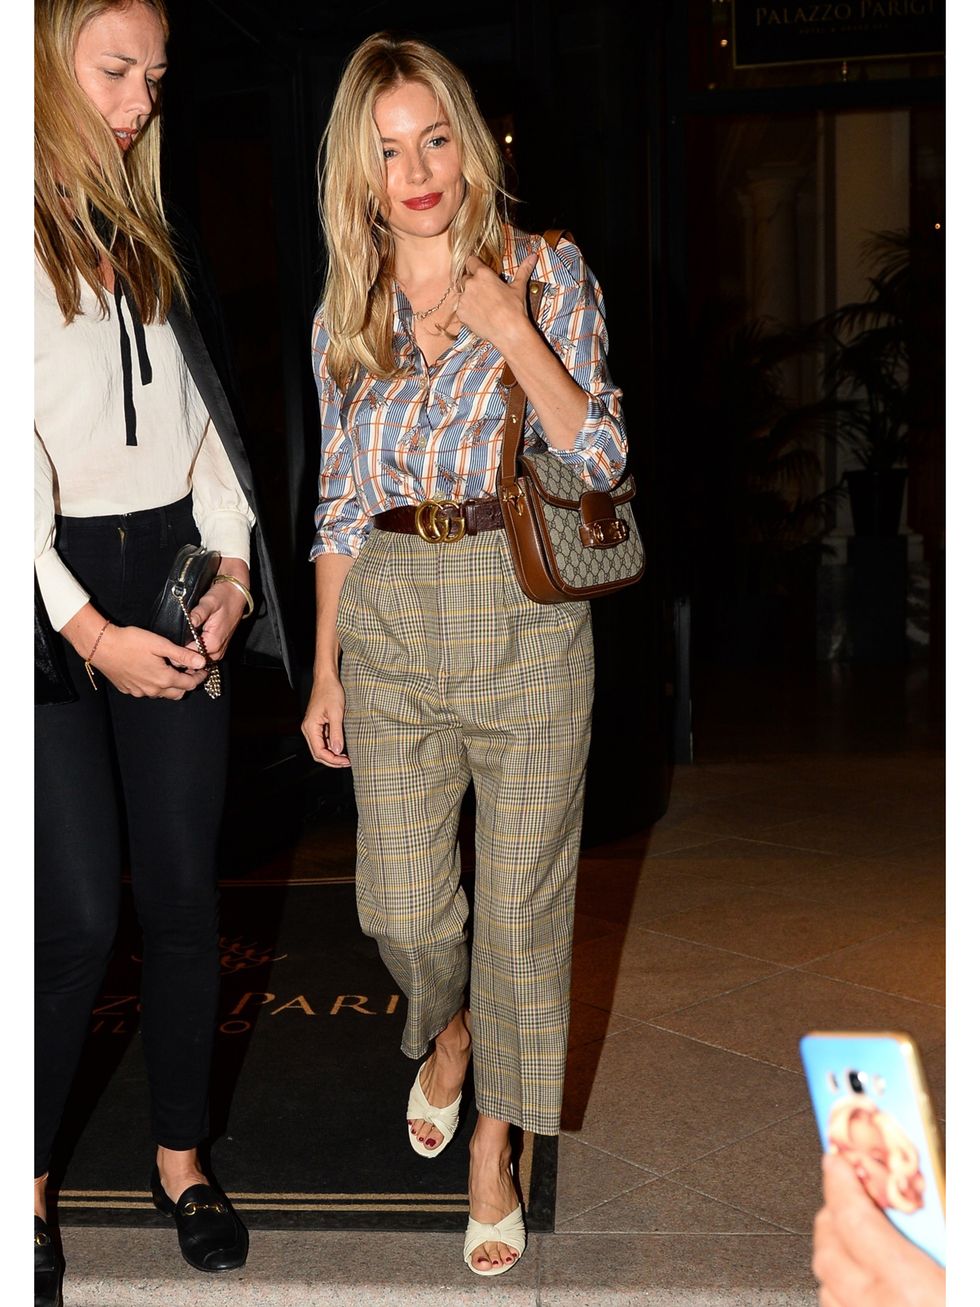 bguk1726874    rights worldwide except in france, germany, italy, switzerland  milan, italy    exclusive    strictly no mail online    actors sienna miller and jared leto spotted out in milan  during milan fashion weekpictured sienna millerbackgrid uk 22 september 2019 uk 44 208 344 2007  uksalesbackgridcomusa 1 310 798 9111  usasalesbackgridcomuk clients   pictures containing childrenplease pixelate face prior to publication